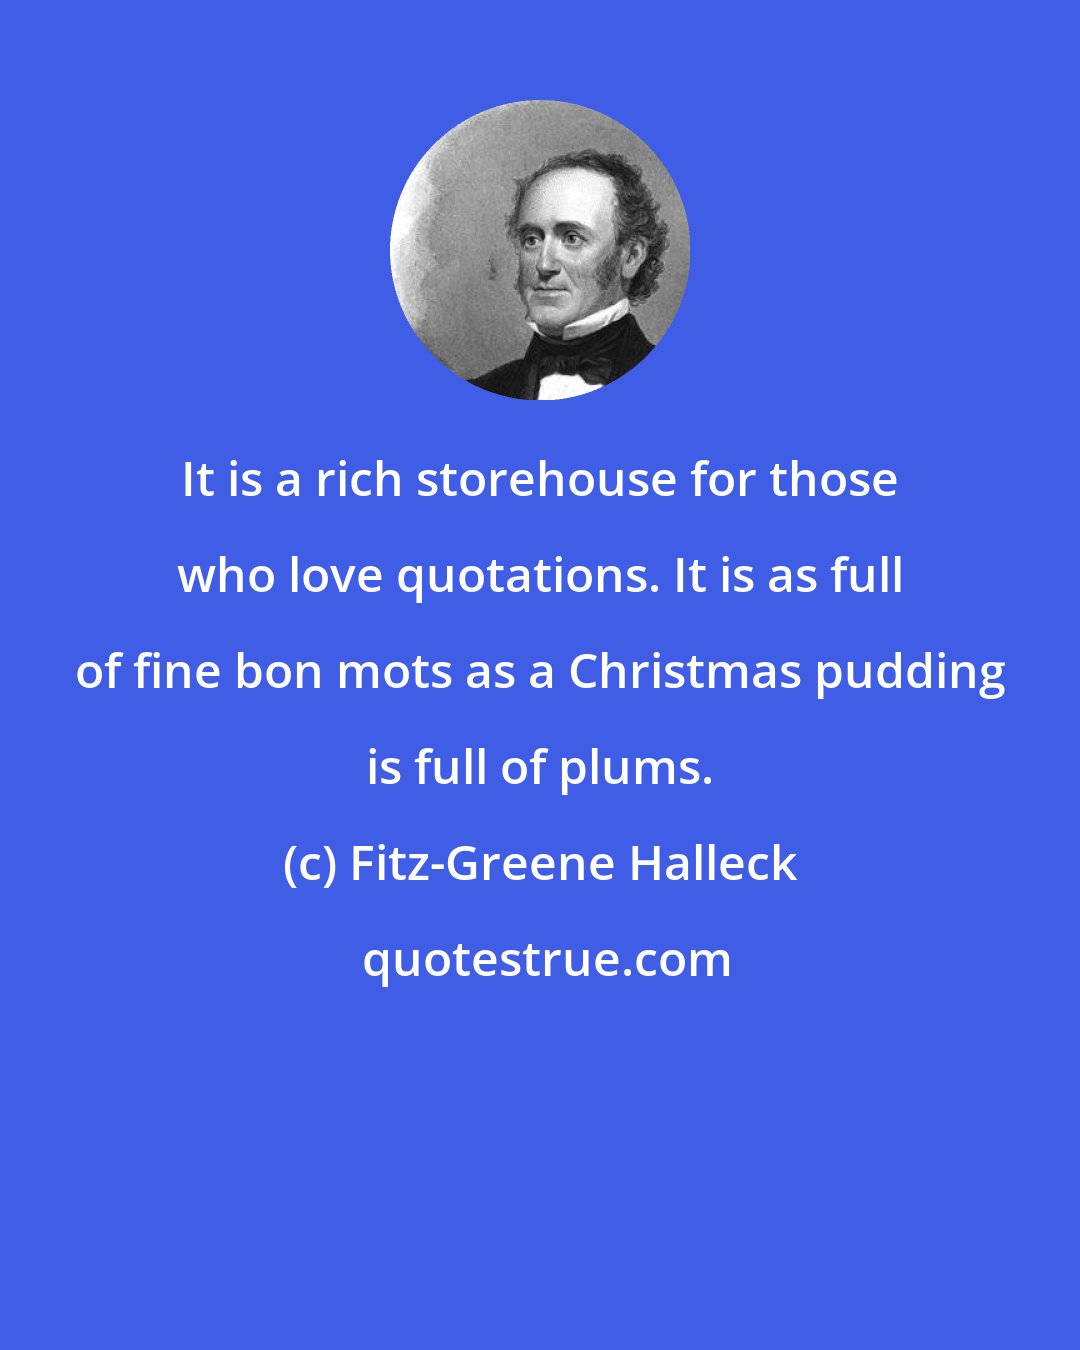 Fitz-Greene Halleck: It is a rich storehouse for those who love quotations. It is as full of fine bon mots as a Christmas pudding is full of plums.